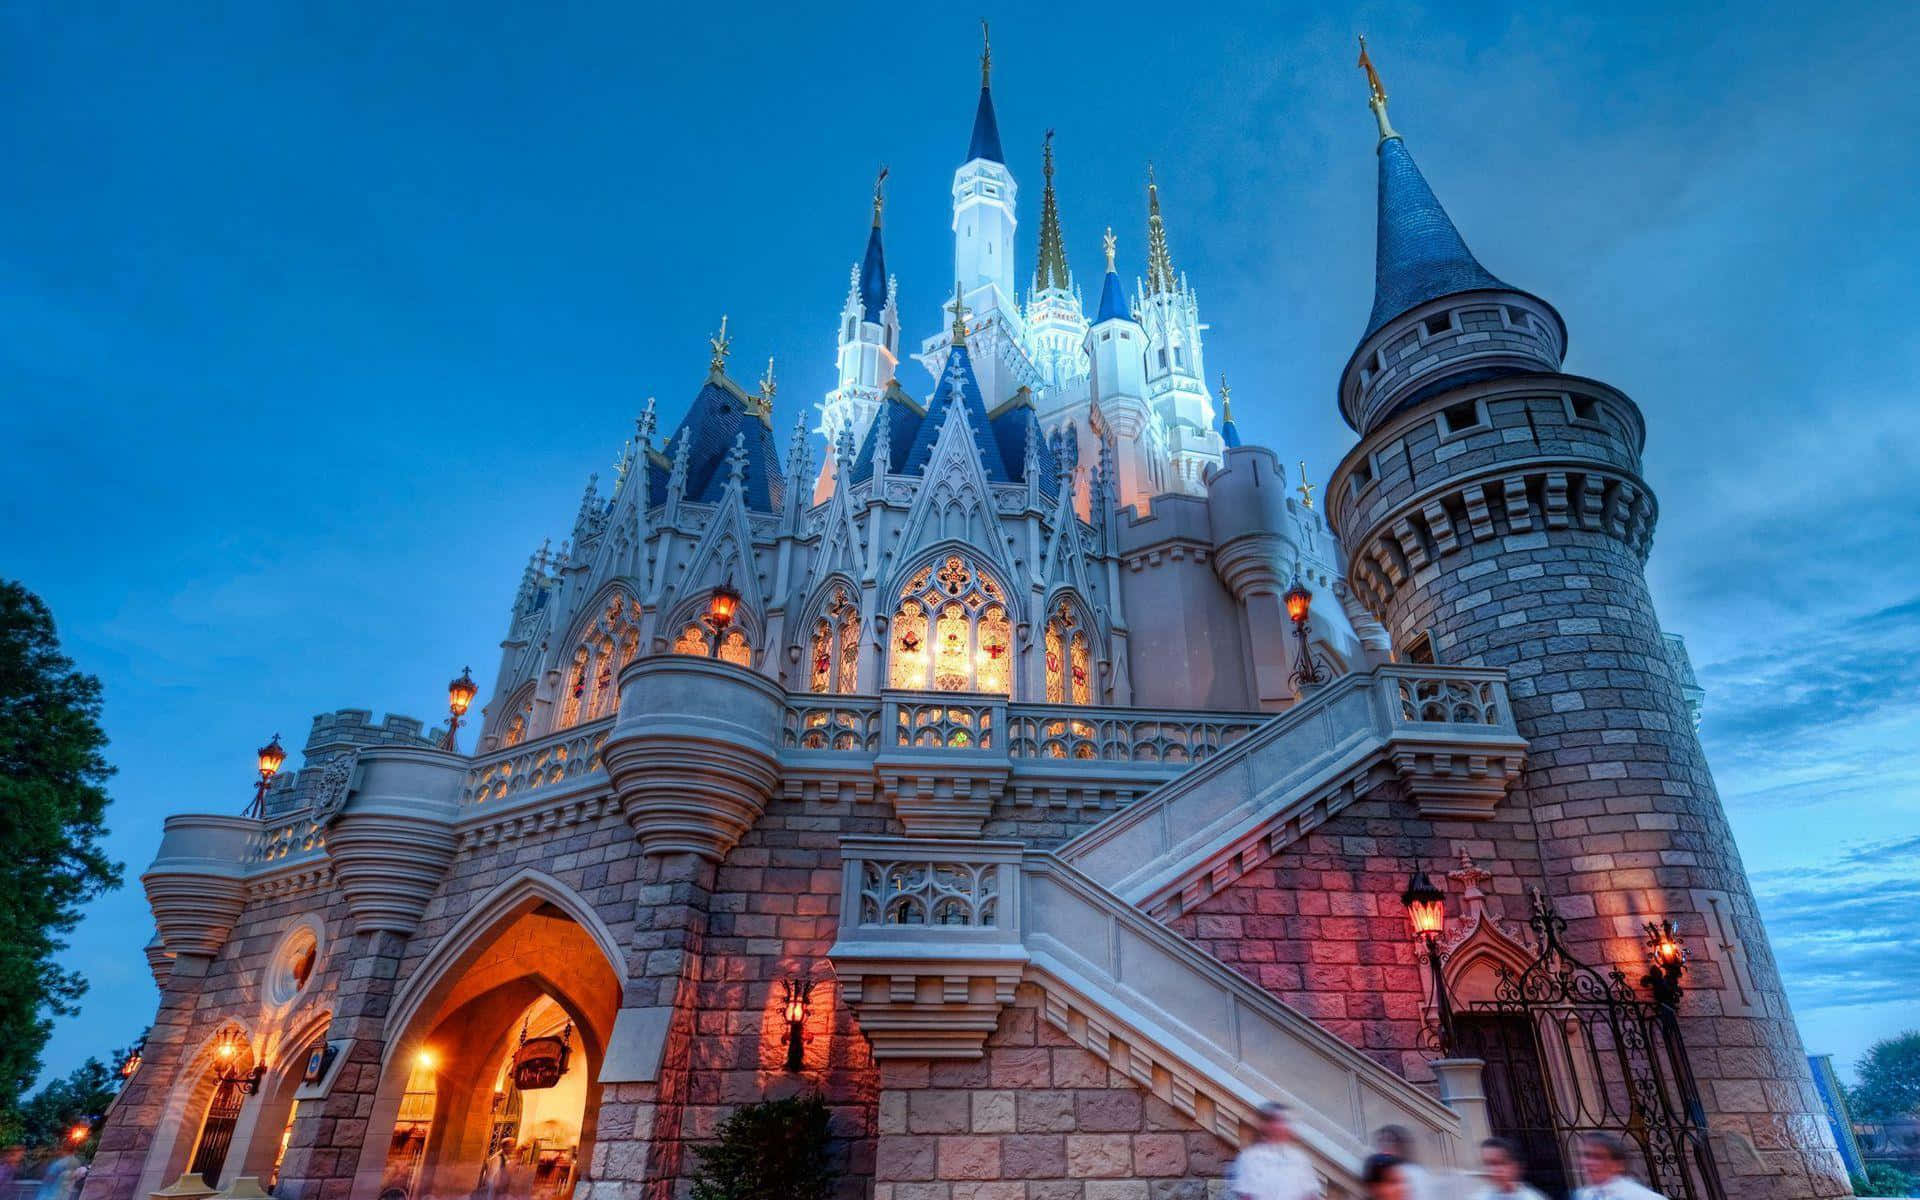 Discover Your Inner Child at the Happiest Place on Earth - Disneyland!